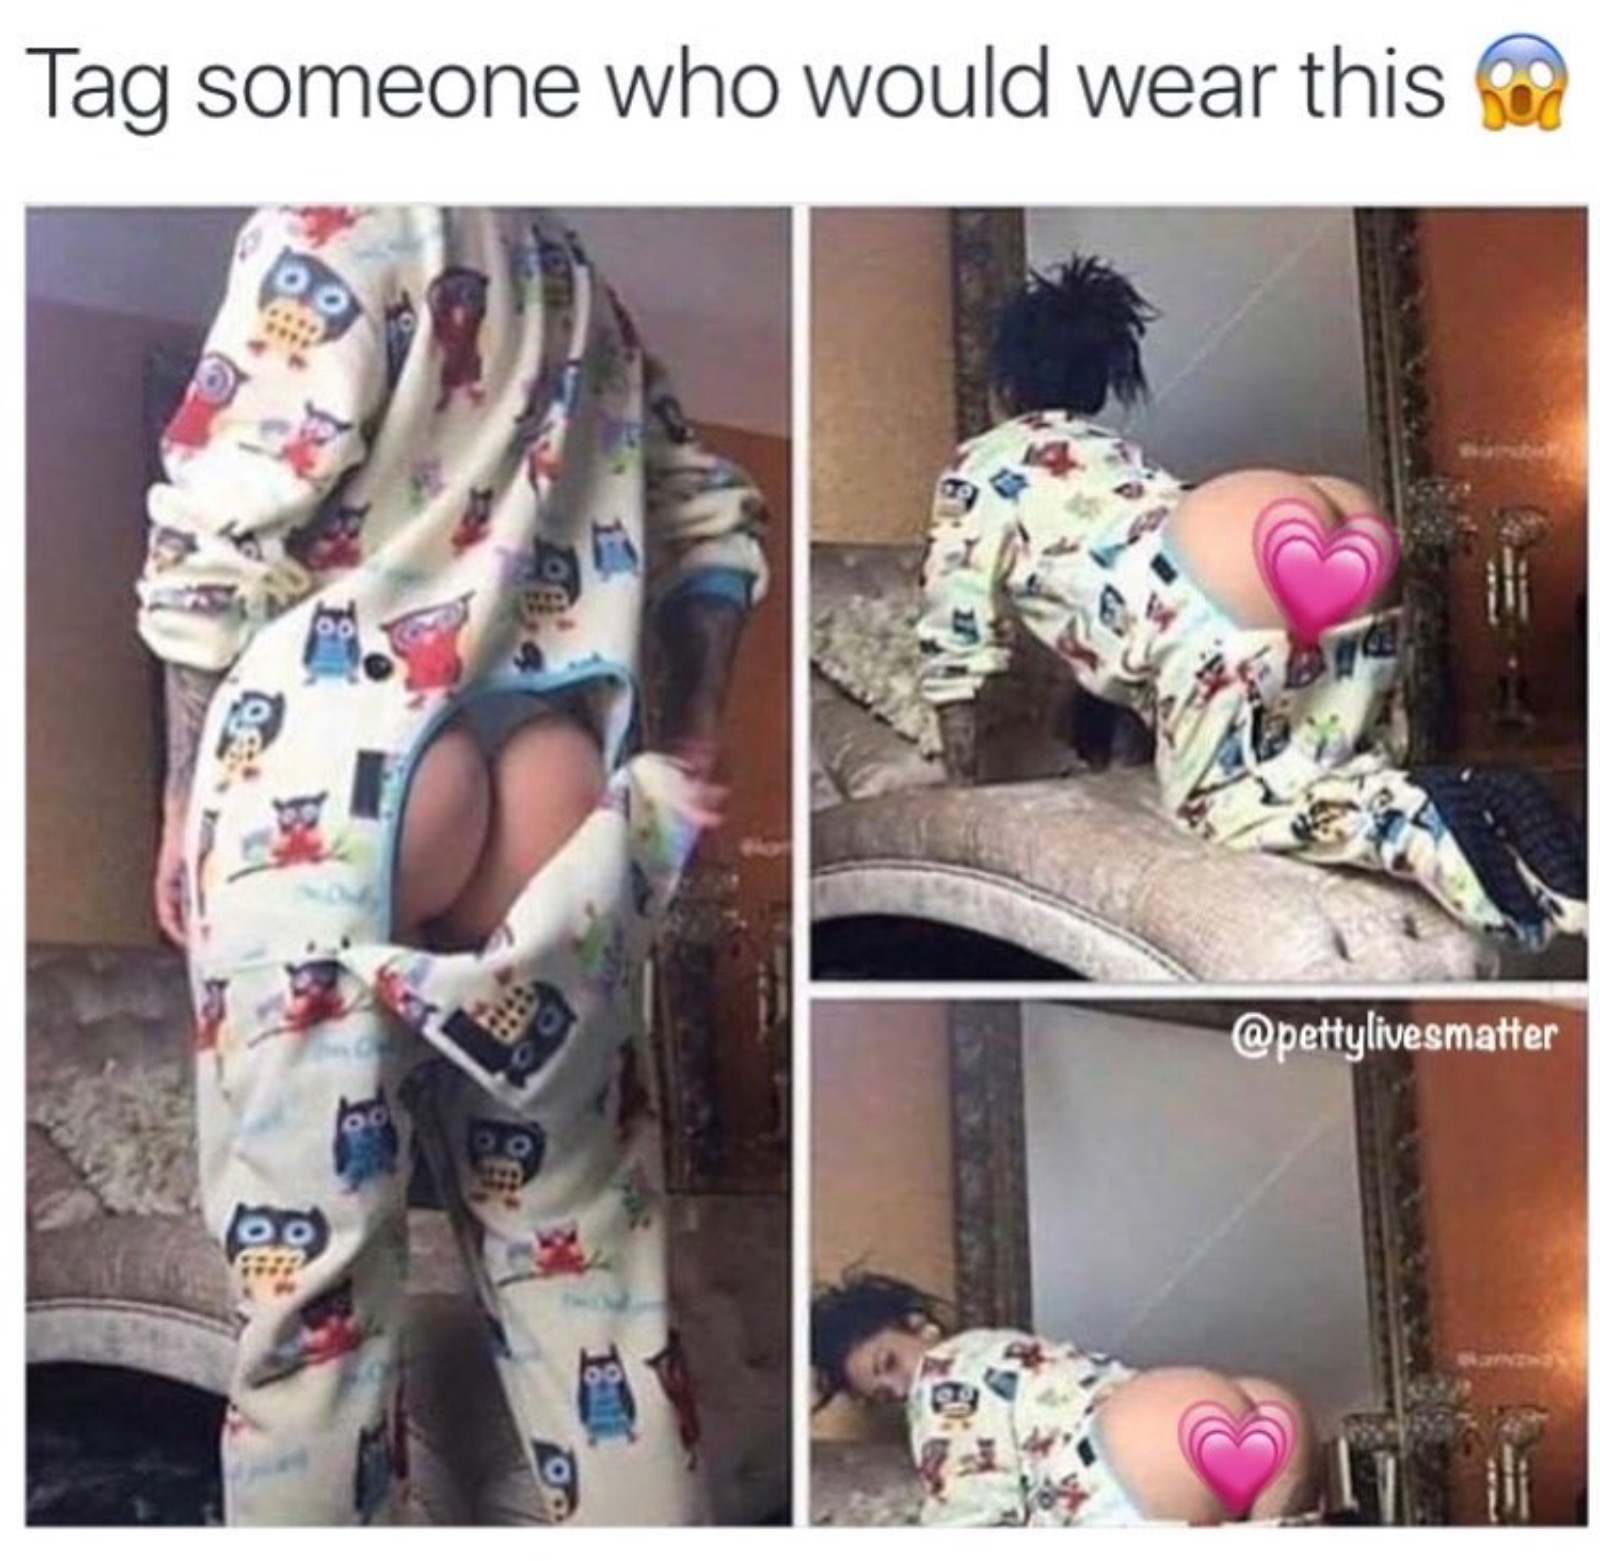 Dank meme of asking to tag someone who would wear these ventilated pajamas.